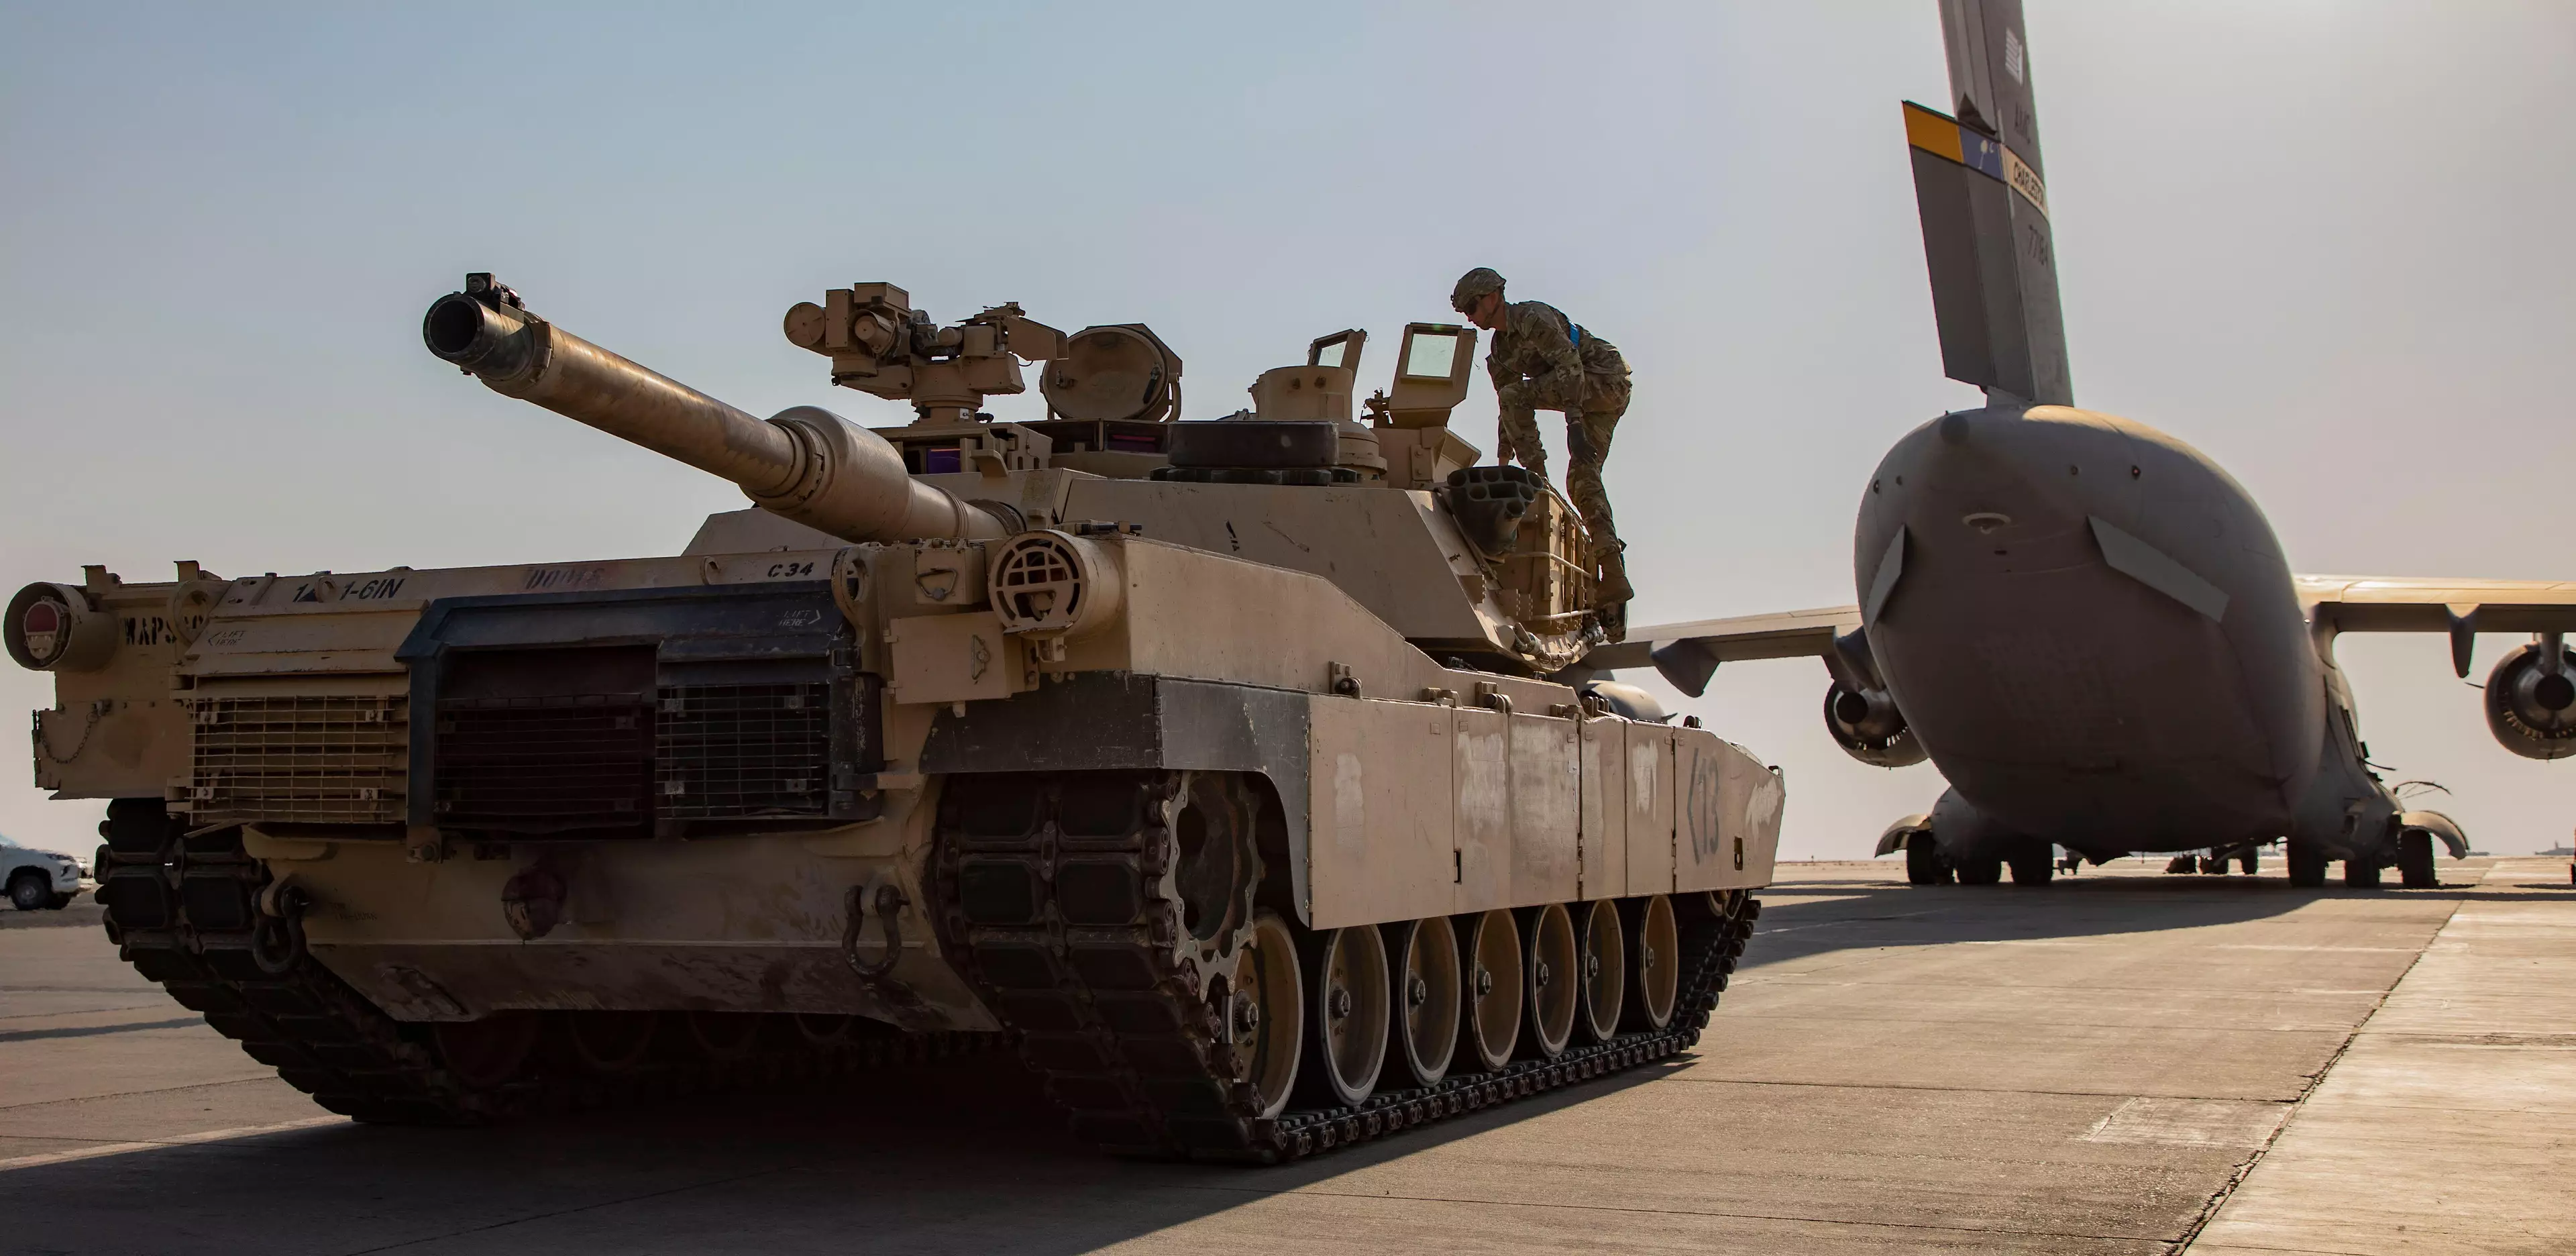 Aussies Are Fuming Over The Federal Government Spending $3.5 Billion On Tanks